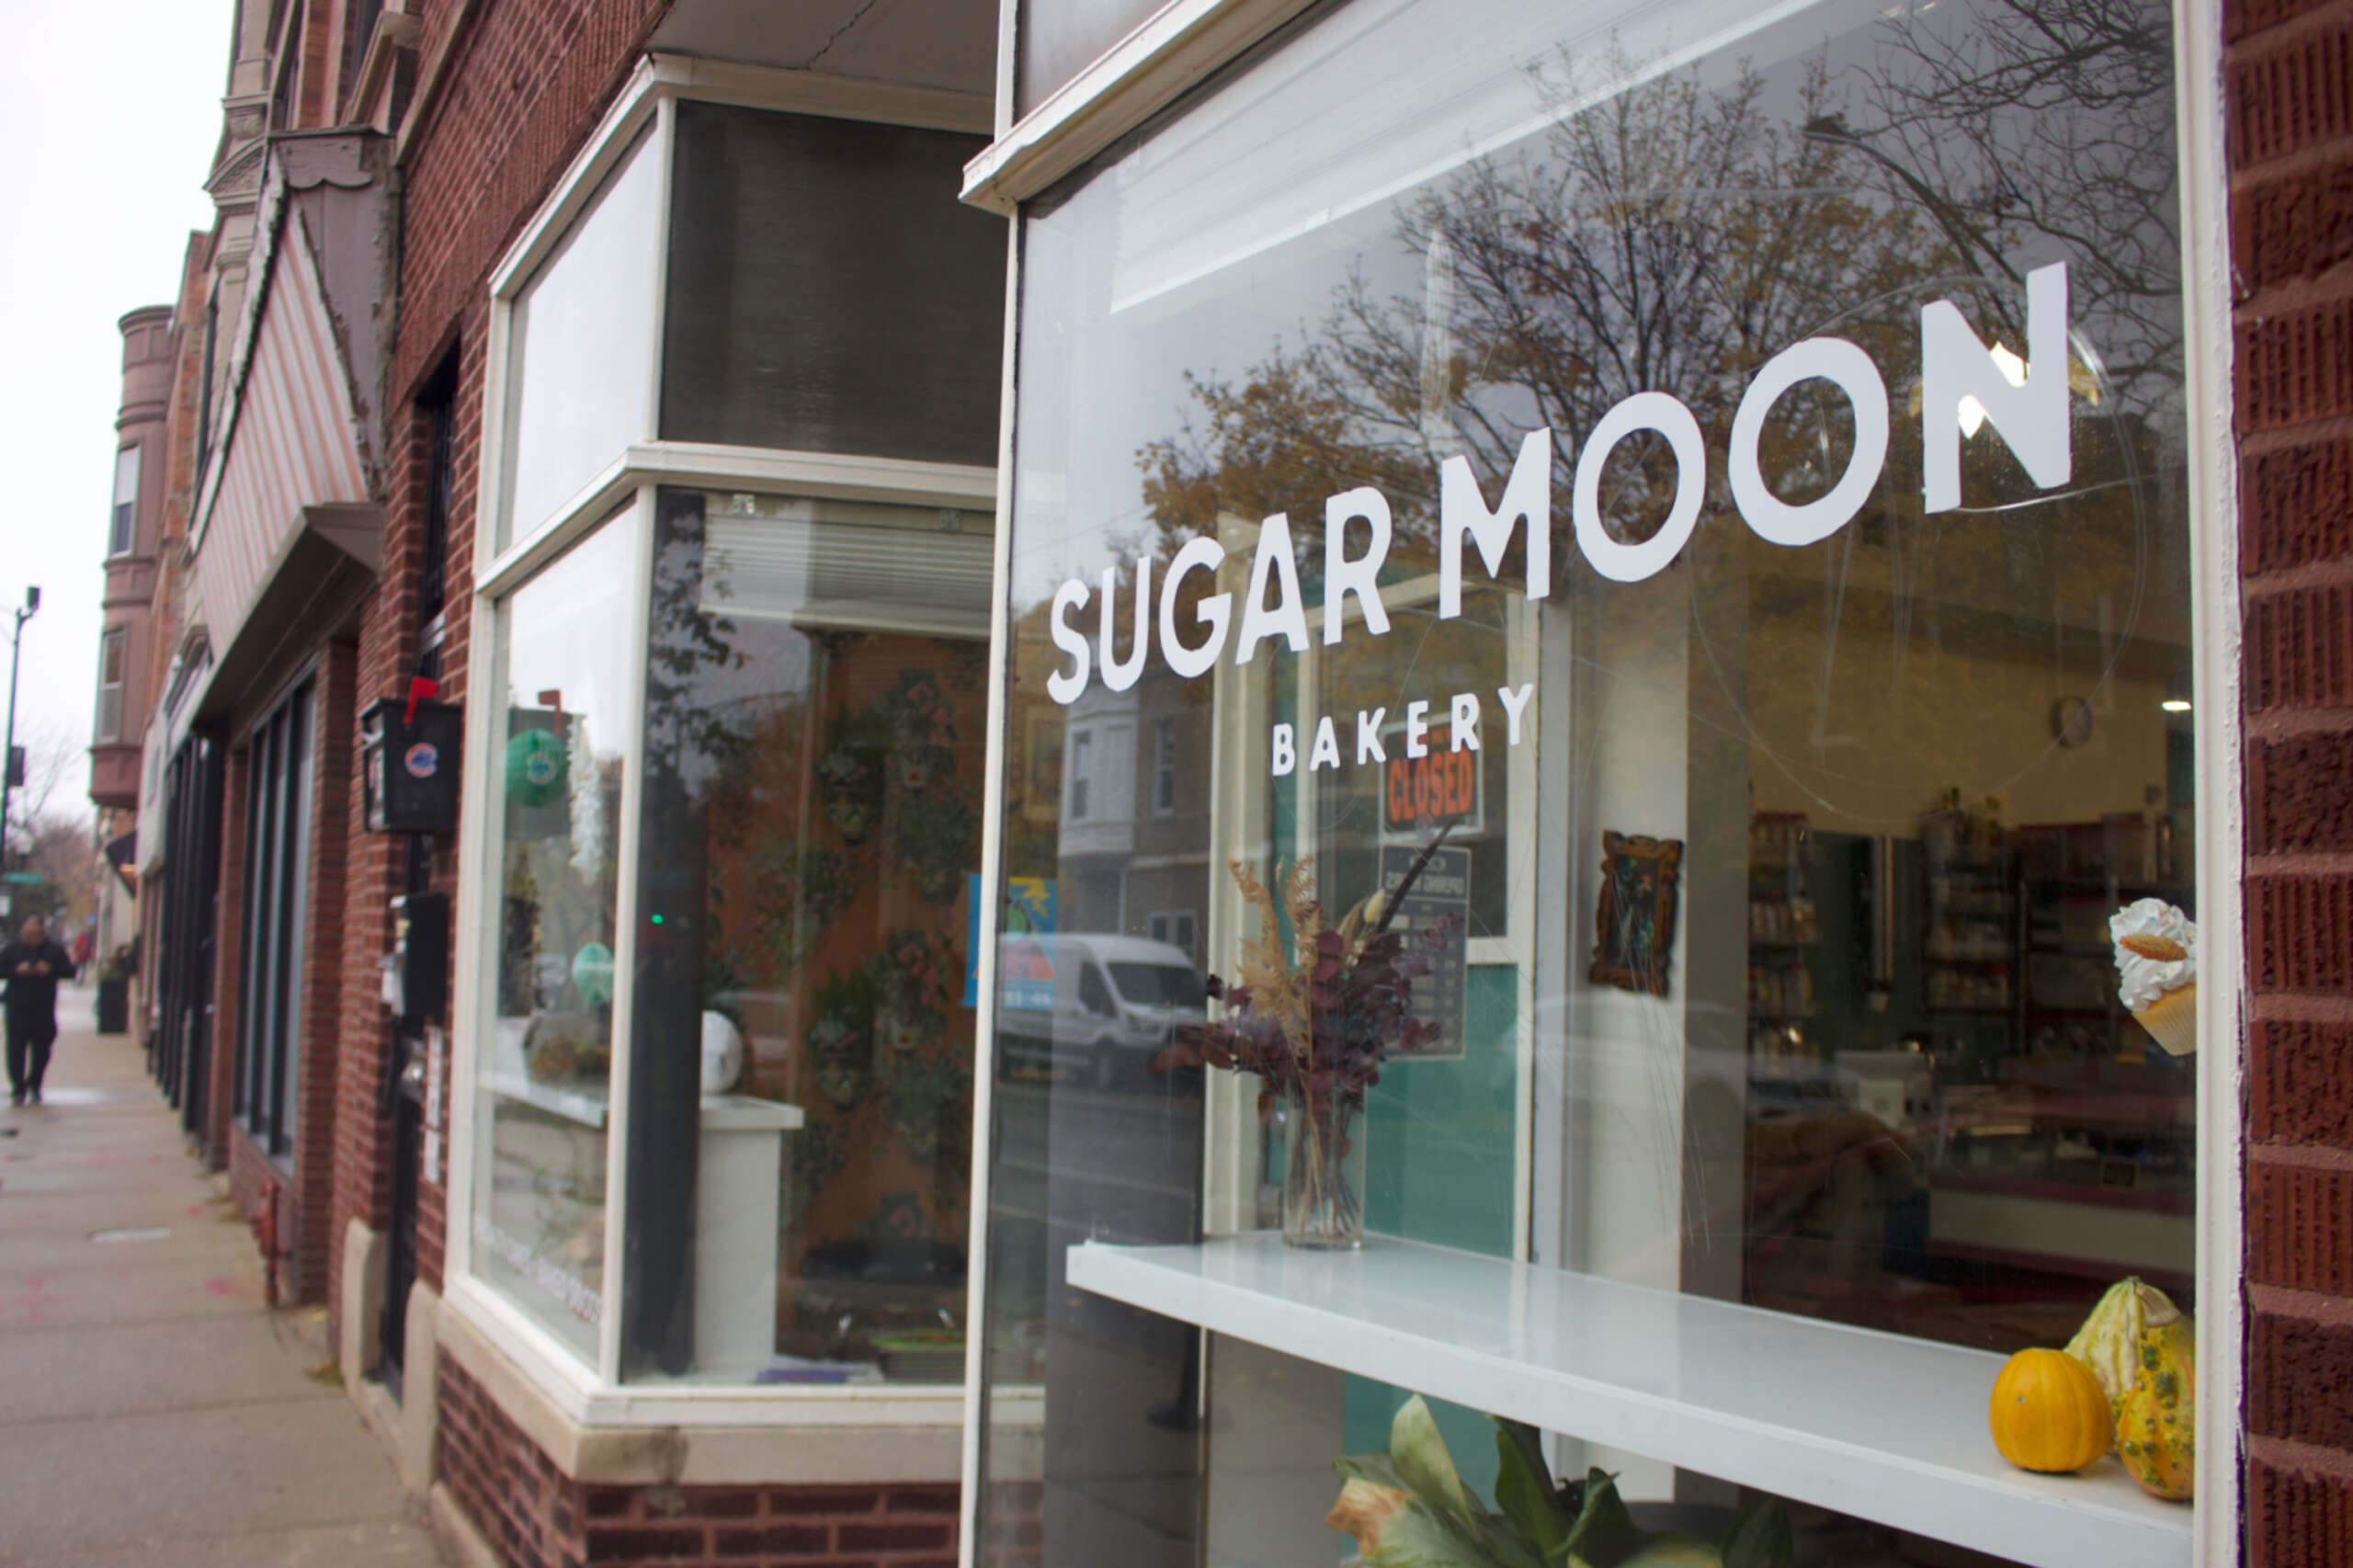 Wrightwood Holiday Stroll Aims To Boost Awareness Of West Logan Square Businesses